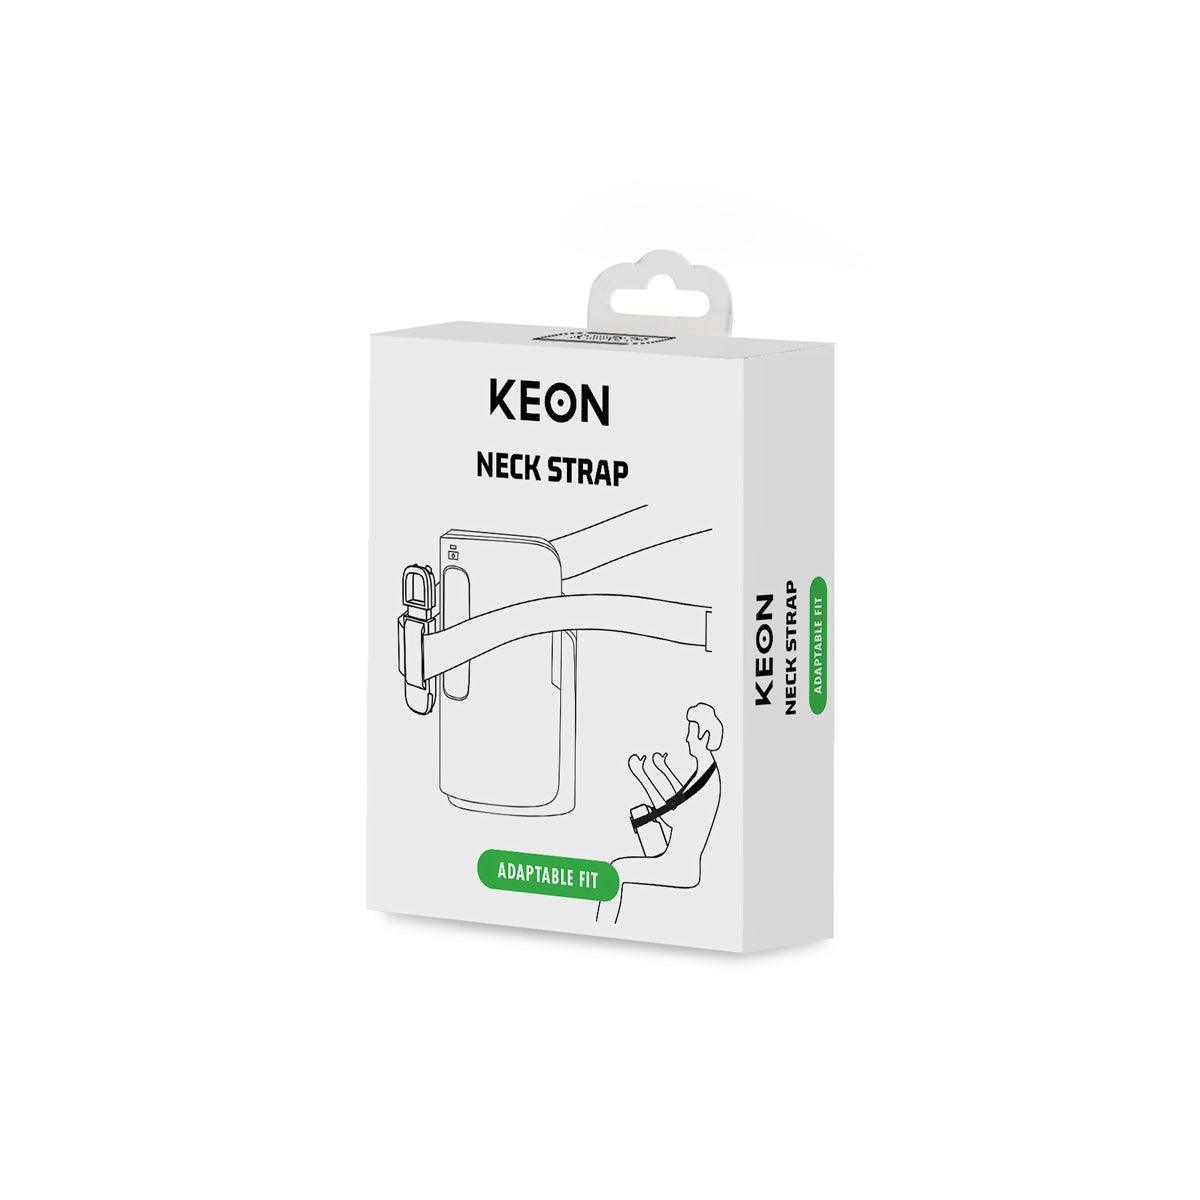 Keon Neck Strap Accessory - Buy At Luxury Toy X - Free 3-Day Shipping